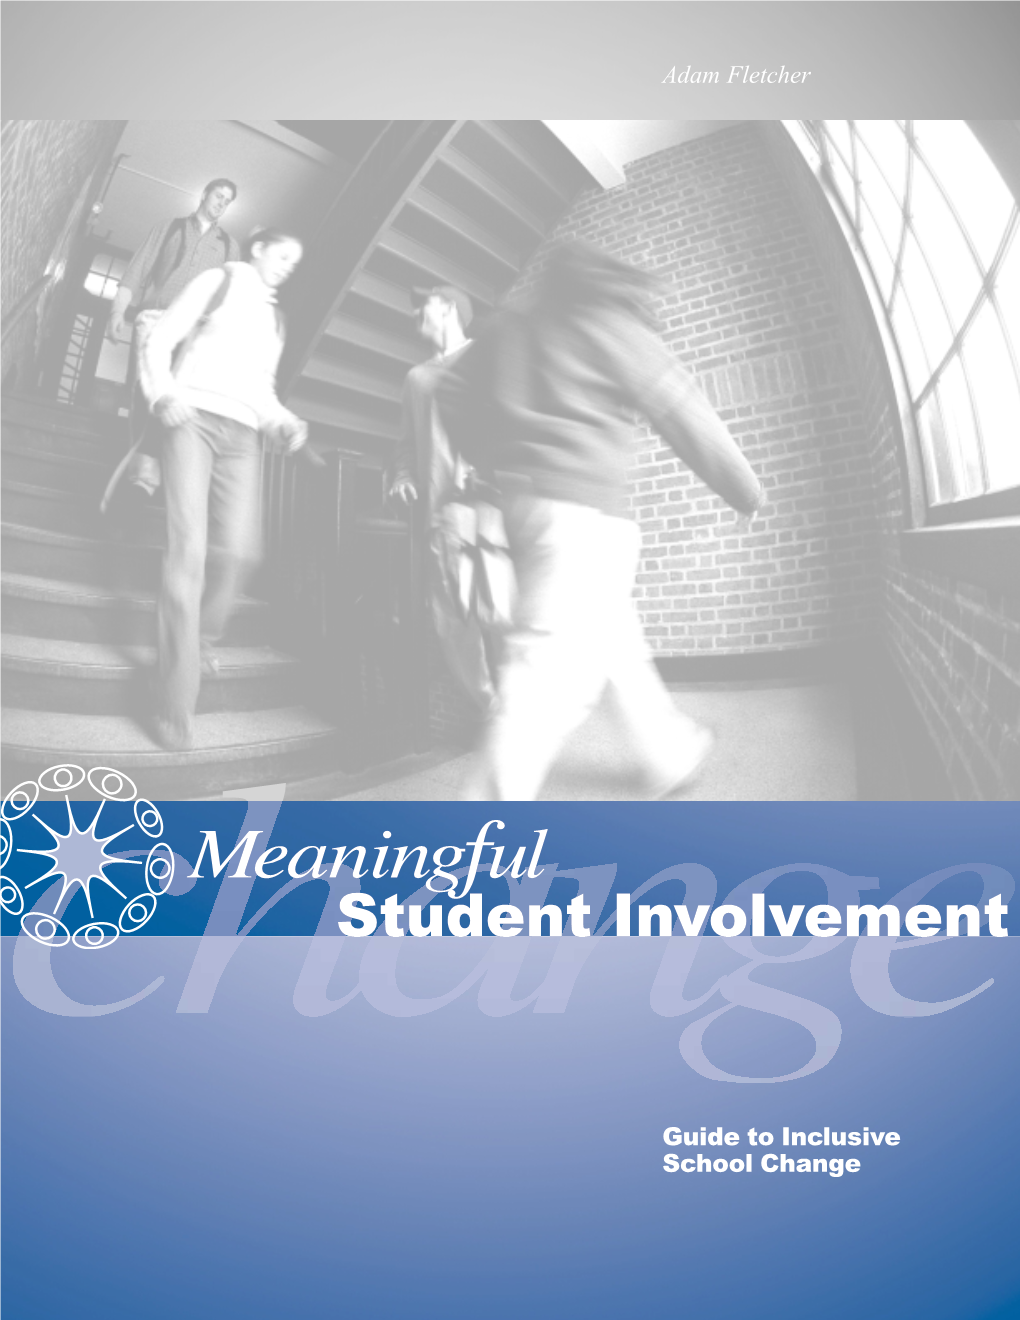 Meaningful Student Involvement: Guide to Inclusive School Change Copyright ©2003 by Adam Fletcher